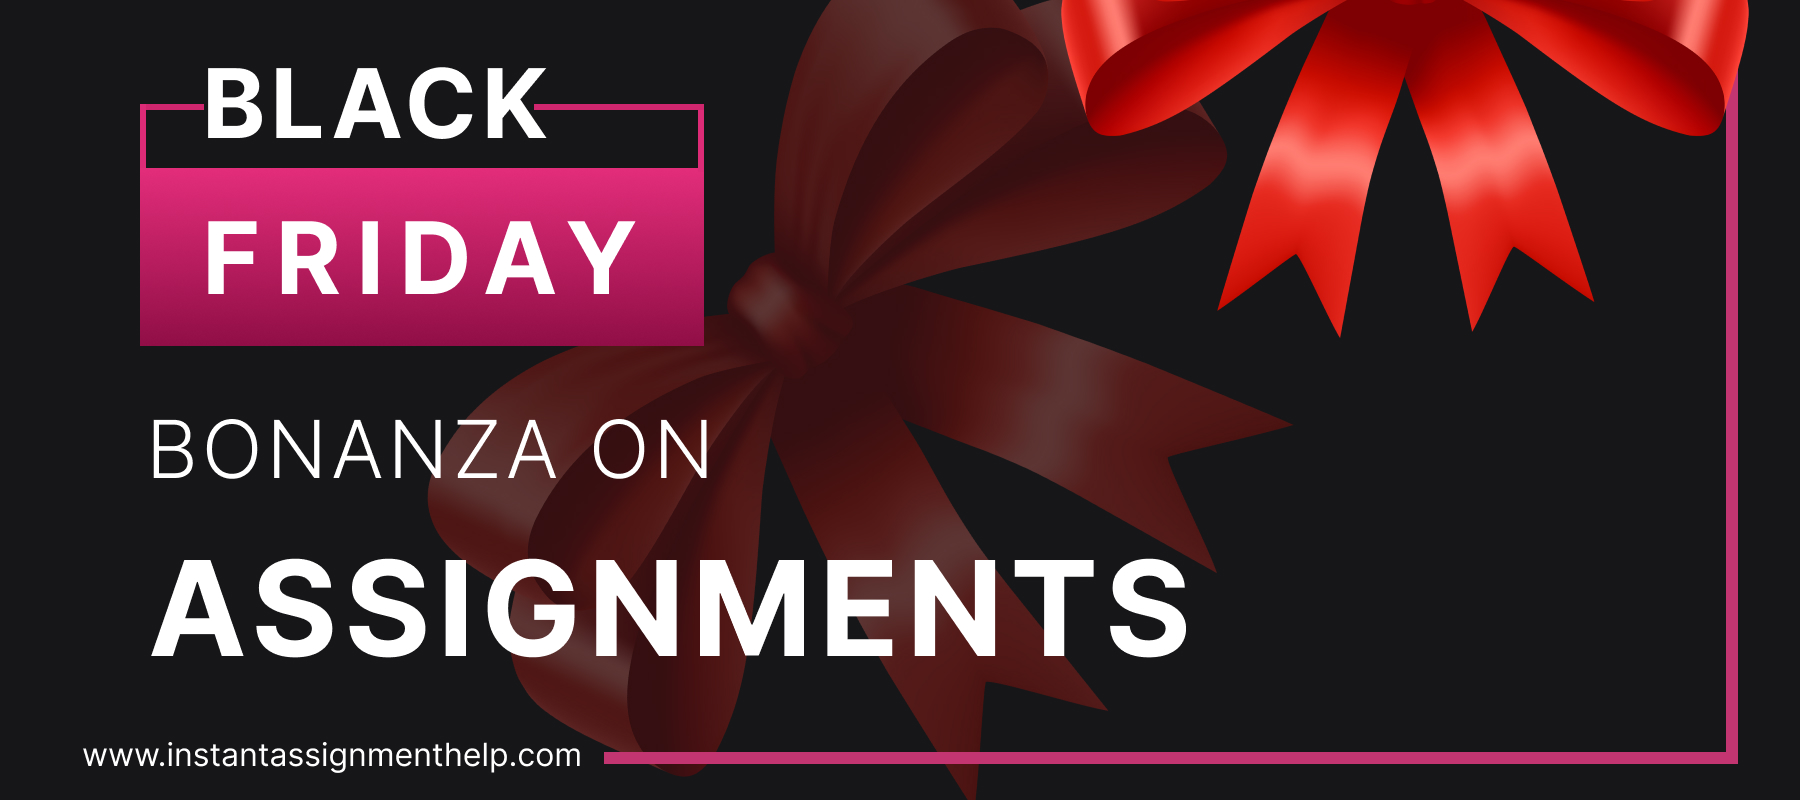 Black Friday 2020 - Up To 50% OFF on Assignments!